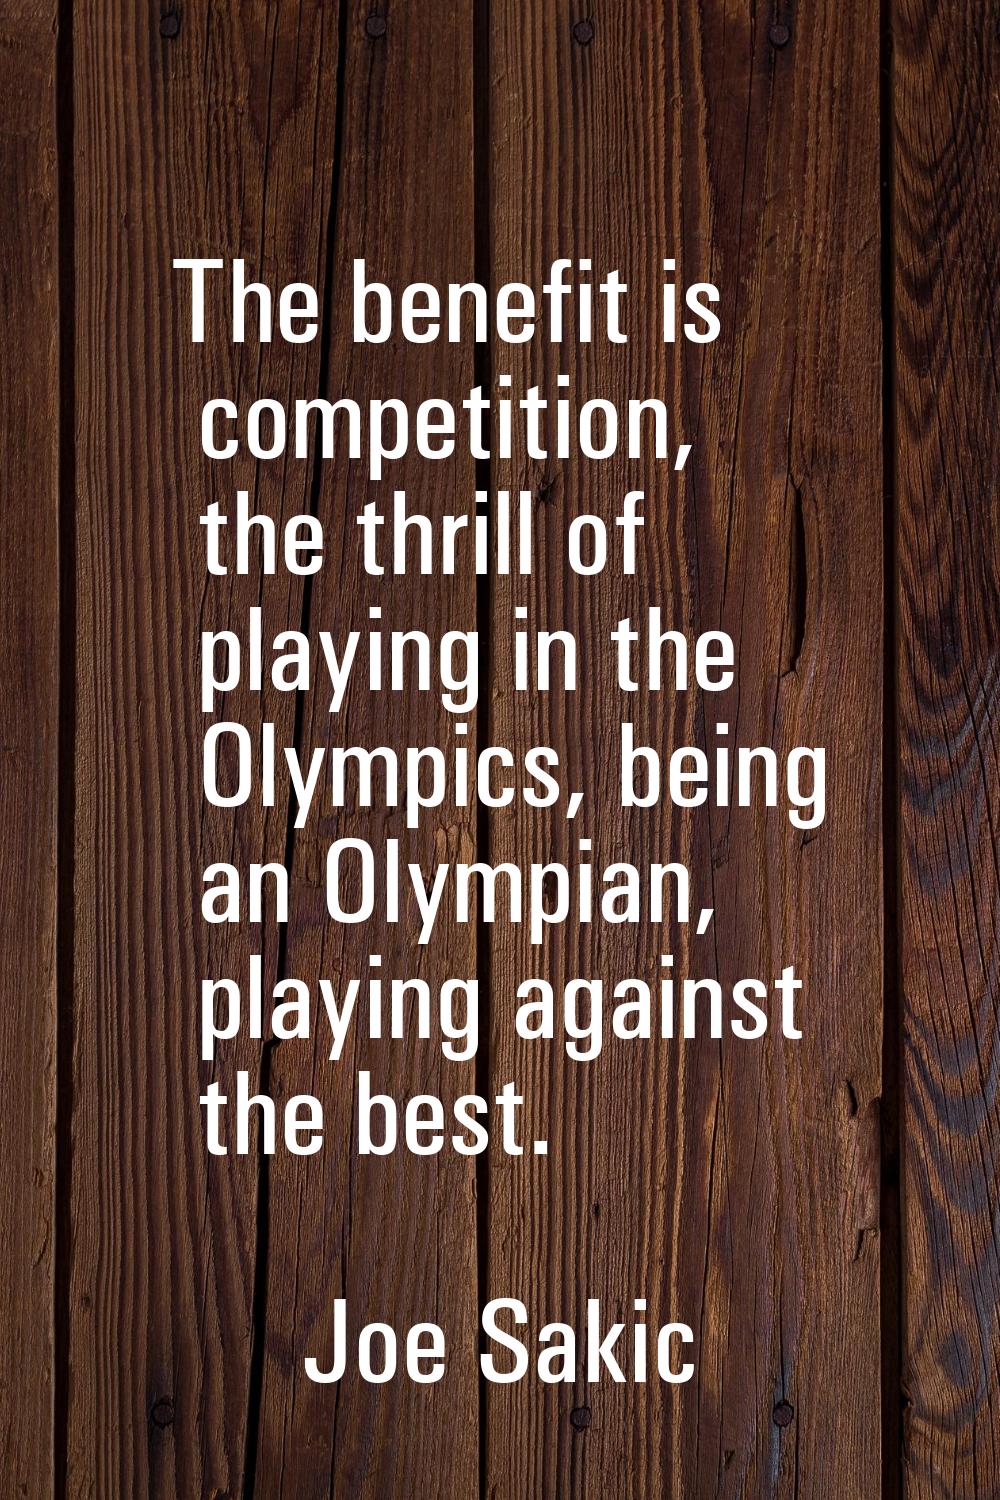 The benefit is competition, the thrill of playing in the Olympics, being an Olympian, playing again